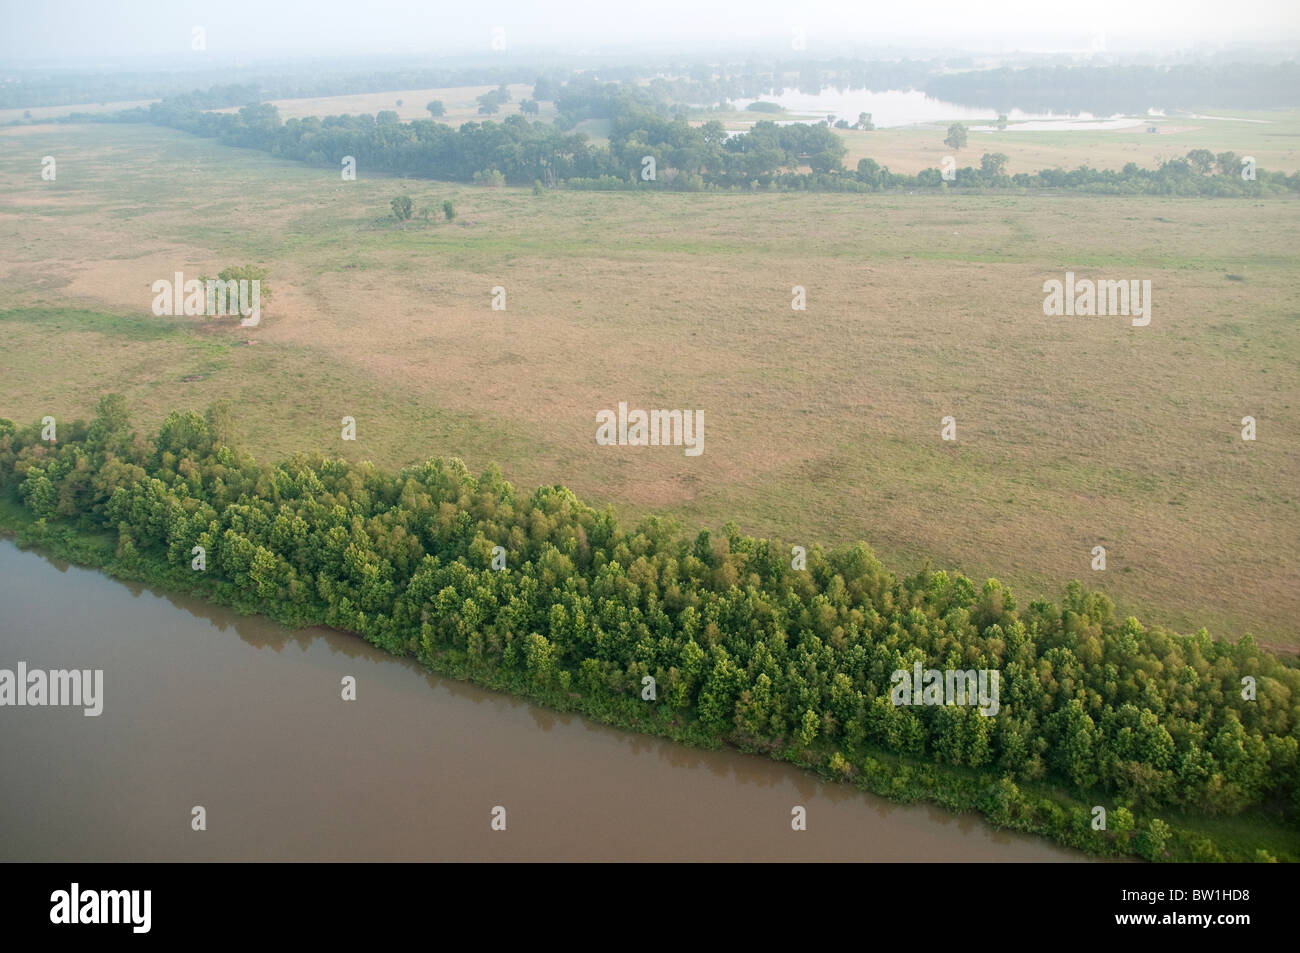 An aerial view of partly wooded grazing land beside the Red River of the South, near the city of Shreveport, in Northern Louisiana, United States. Stock Photo